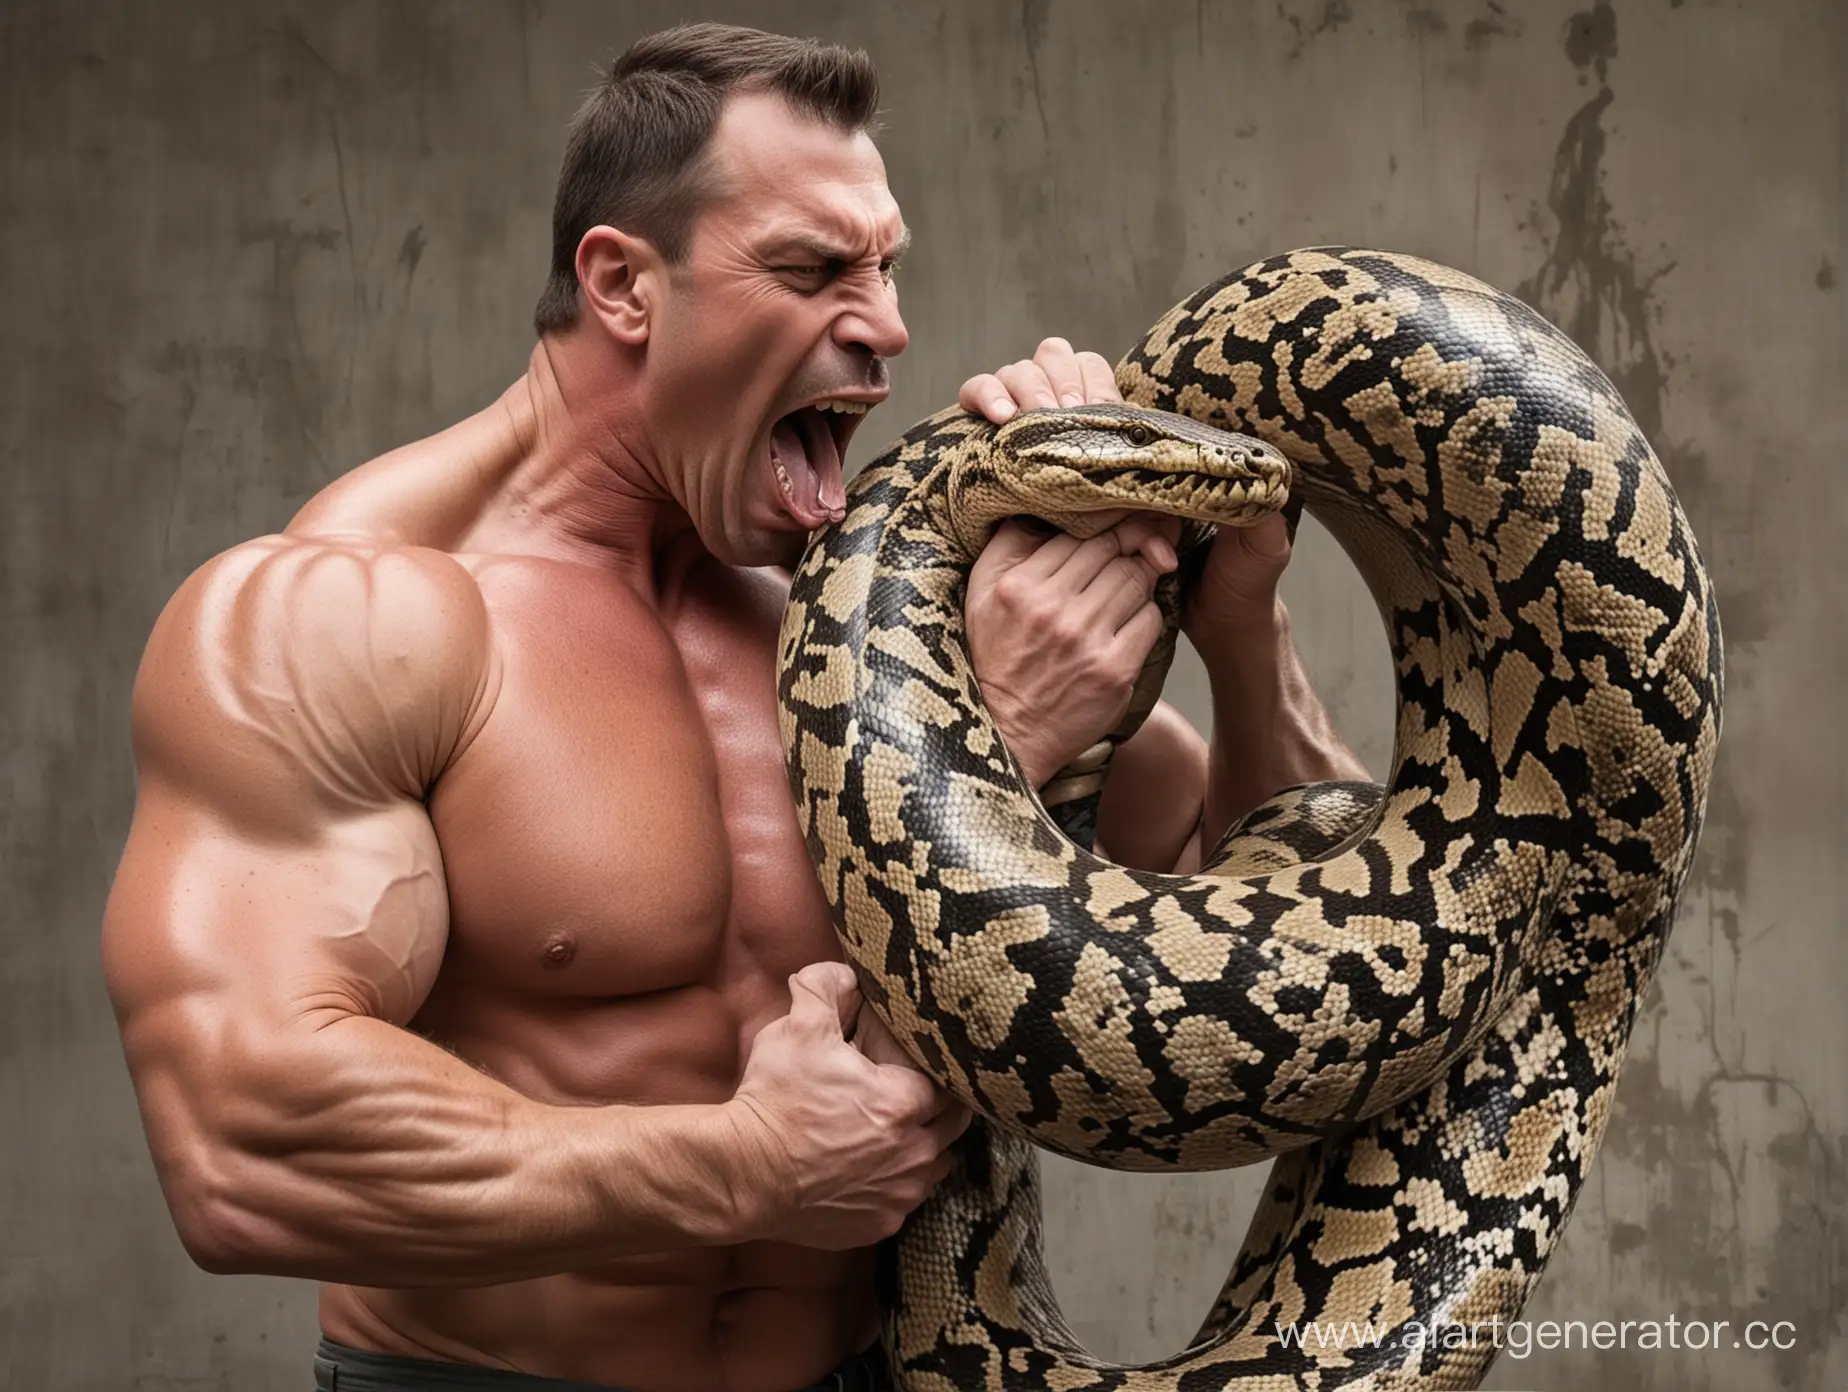 Muscular-Man-Struggles-Against-Giant-Python-in-Gripping-Encounter